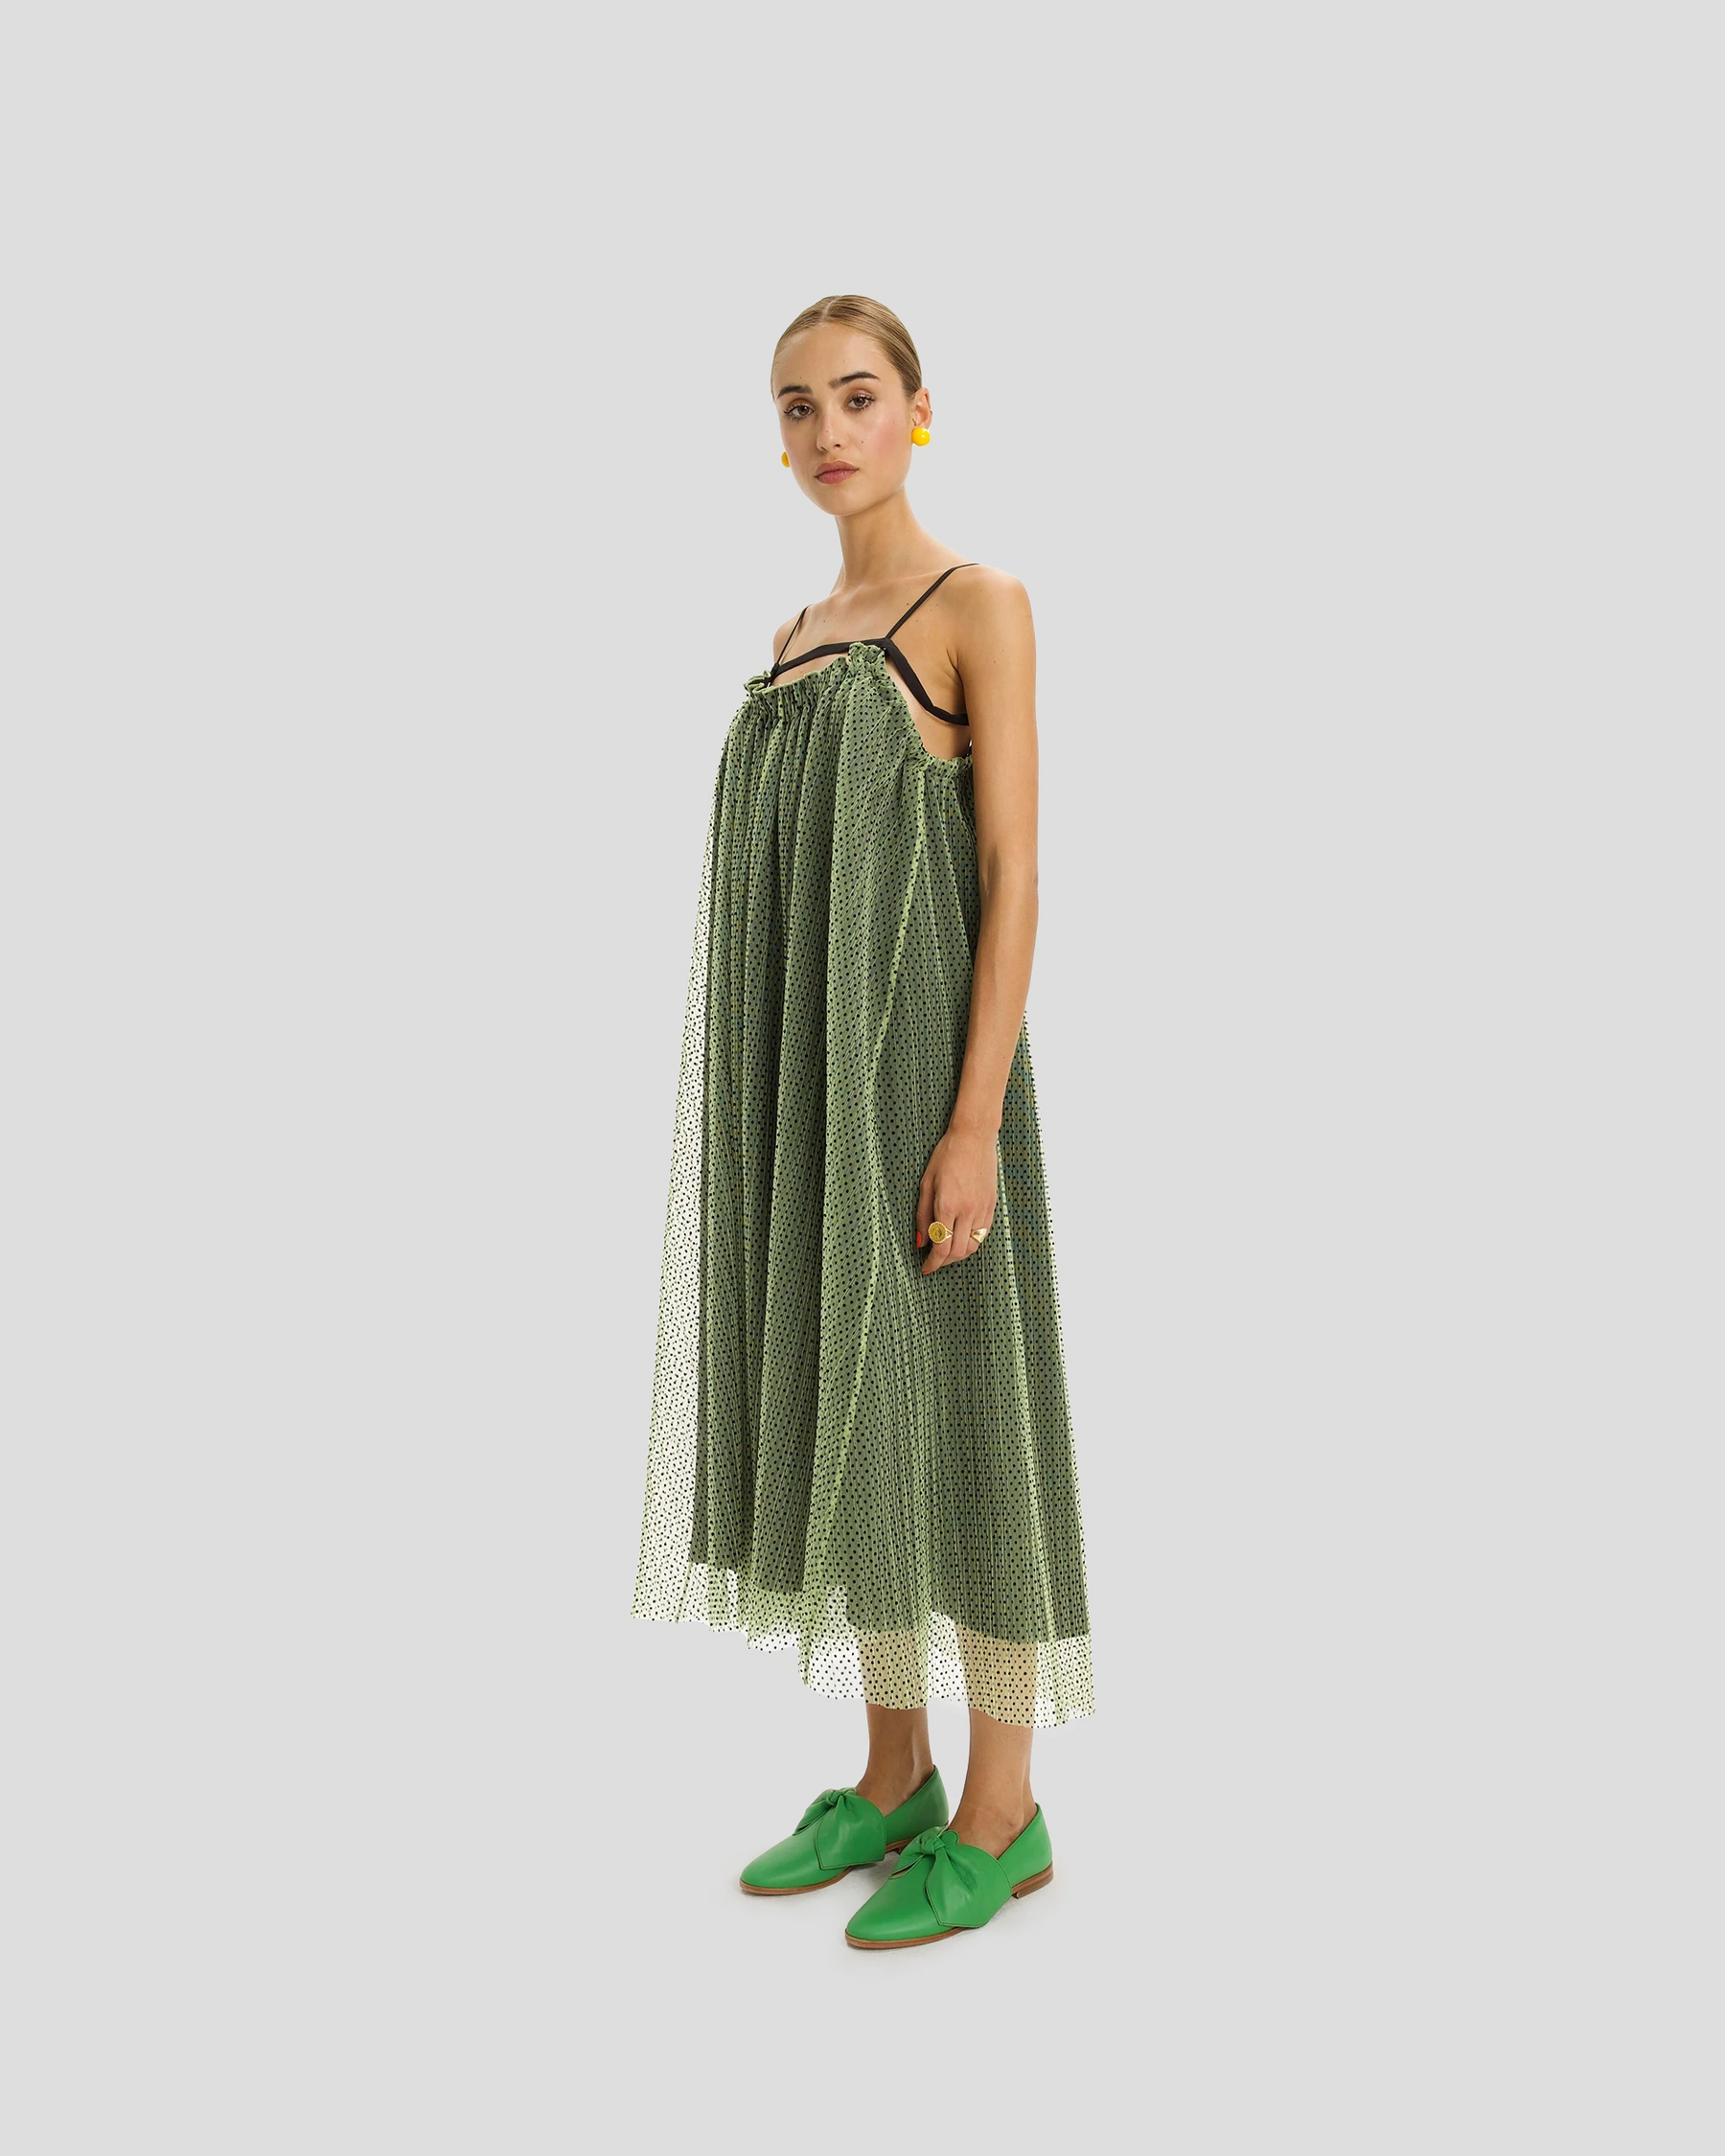 Vickie Dress in Croquant Plumetis Olive